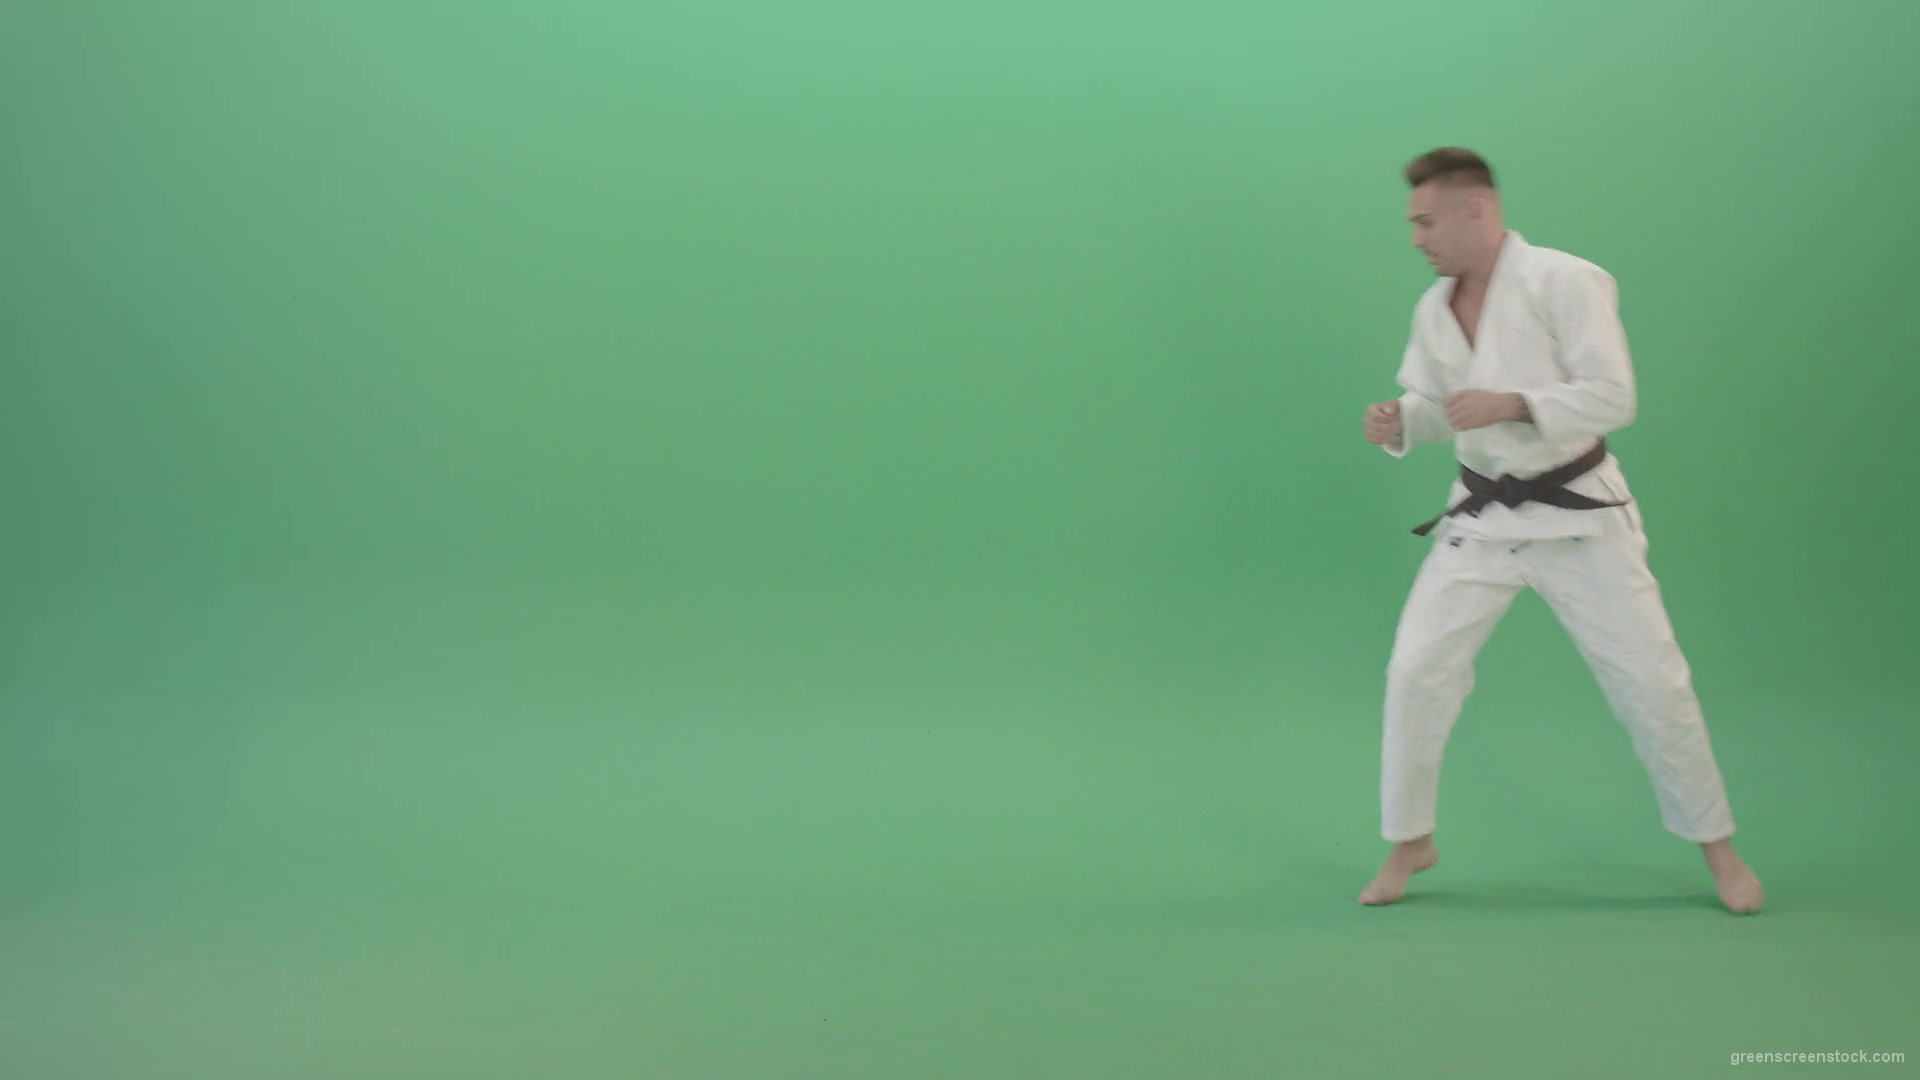 Super-Fighting-Combo-by-Jujutsu-man-in-side-view-isolated-on-green-screen-4K-Video-Footage-1920_005 Green Screen Stock